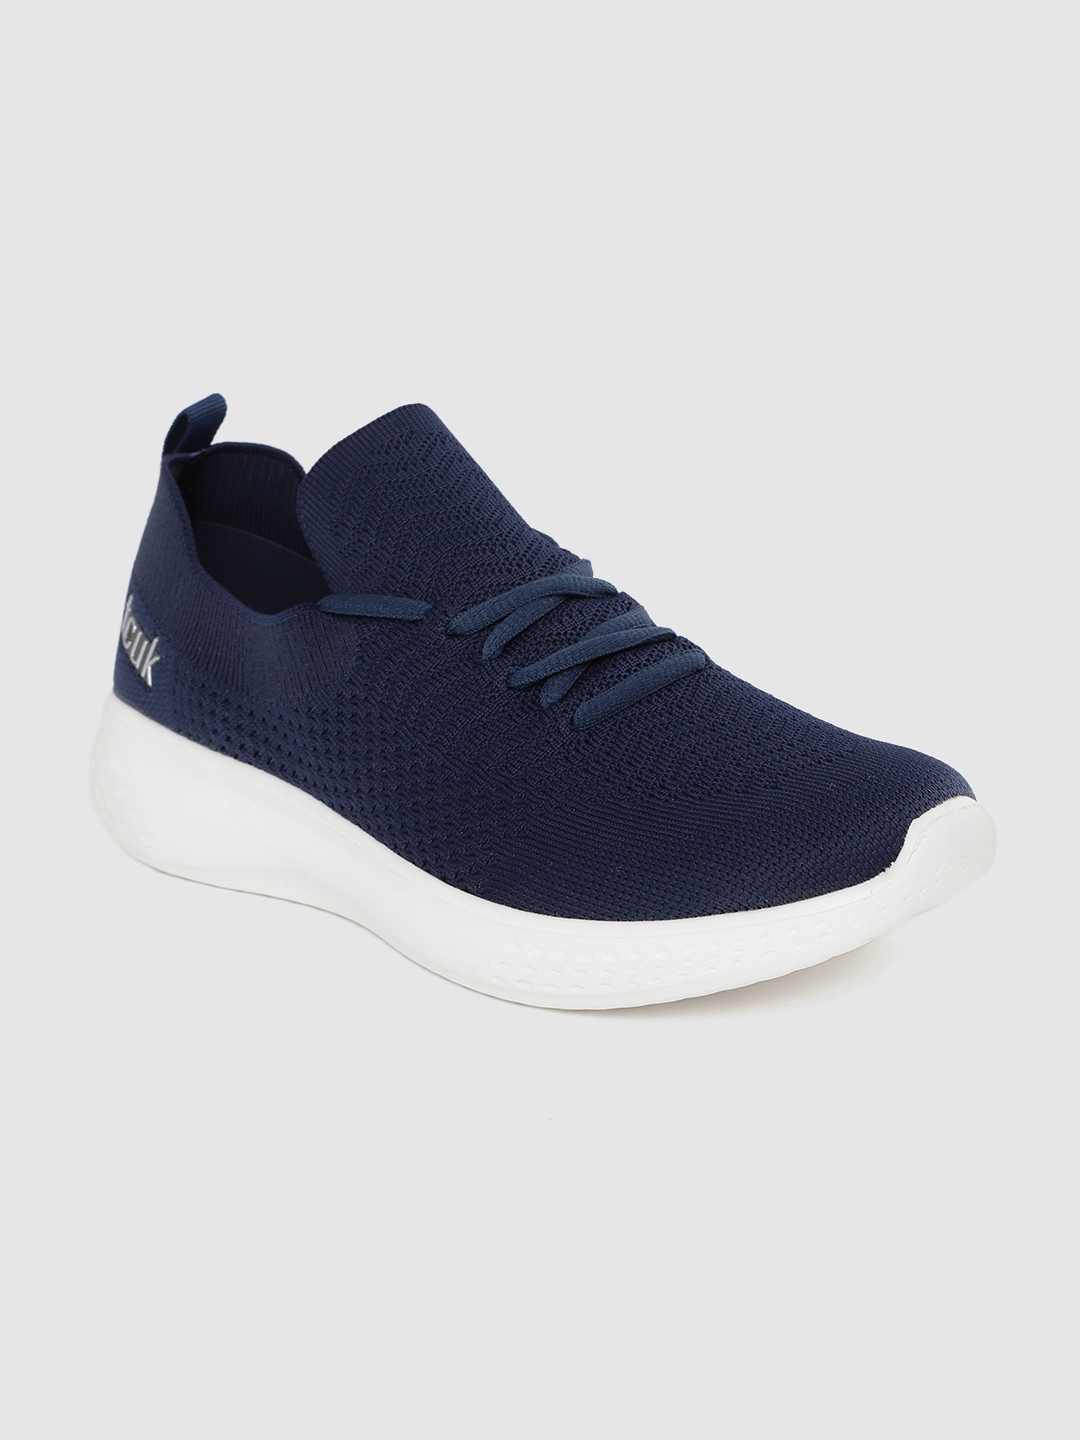 Buy French Connection Men Navy Blue Woven Design Walking Shoes - Sports ...